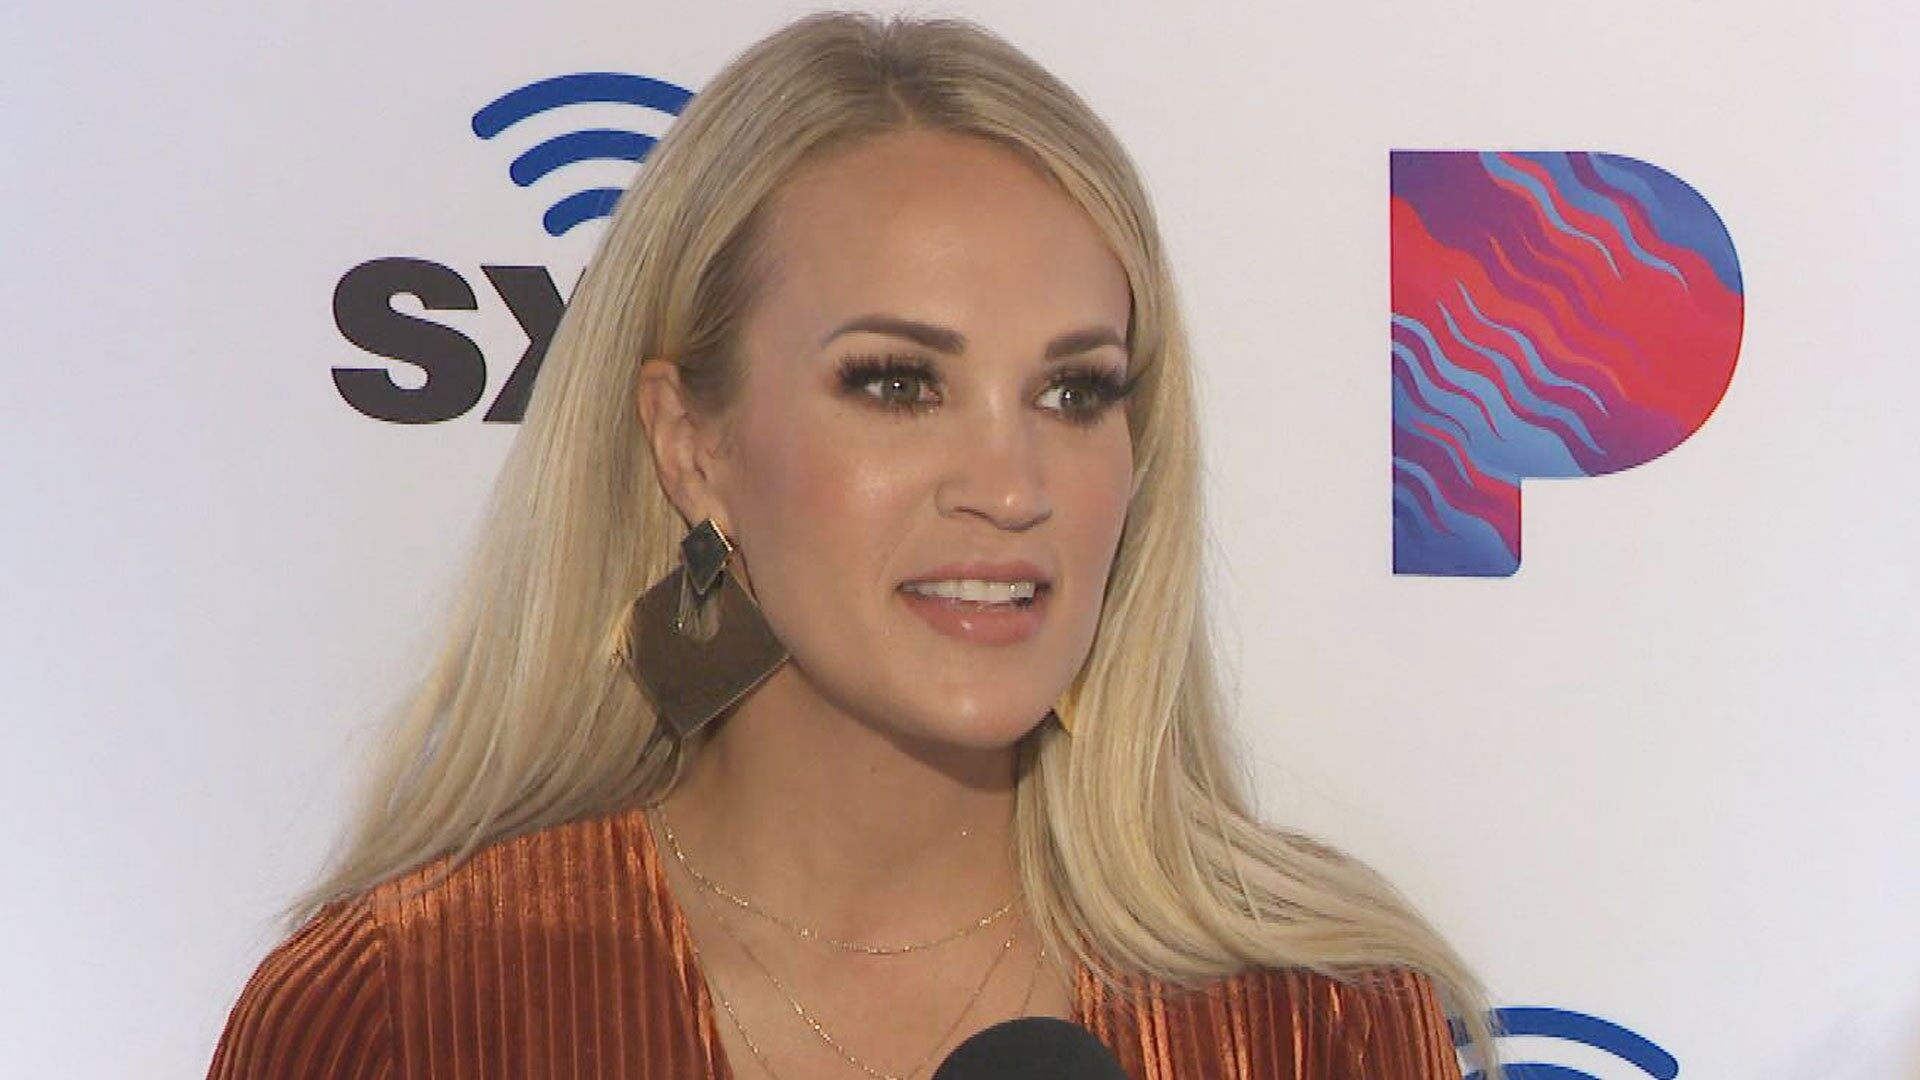 Carrie Underwood closes CMA Fest set with 'Before He Cheats